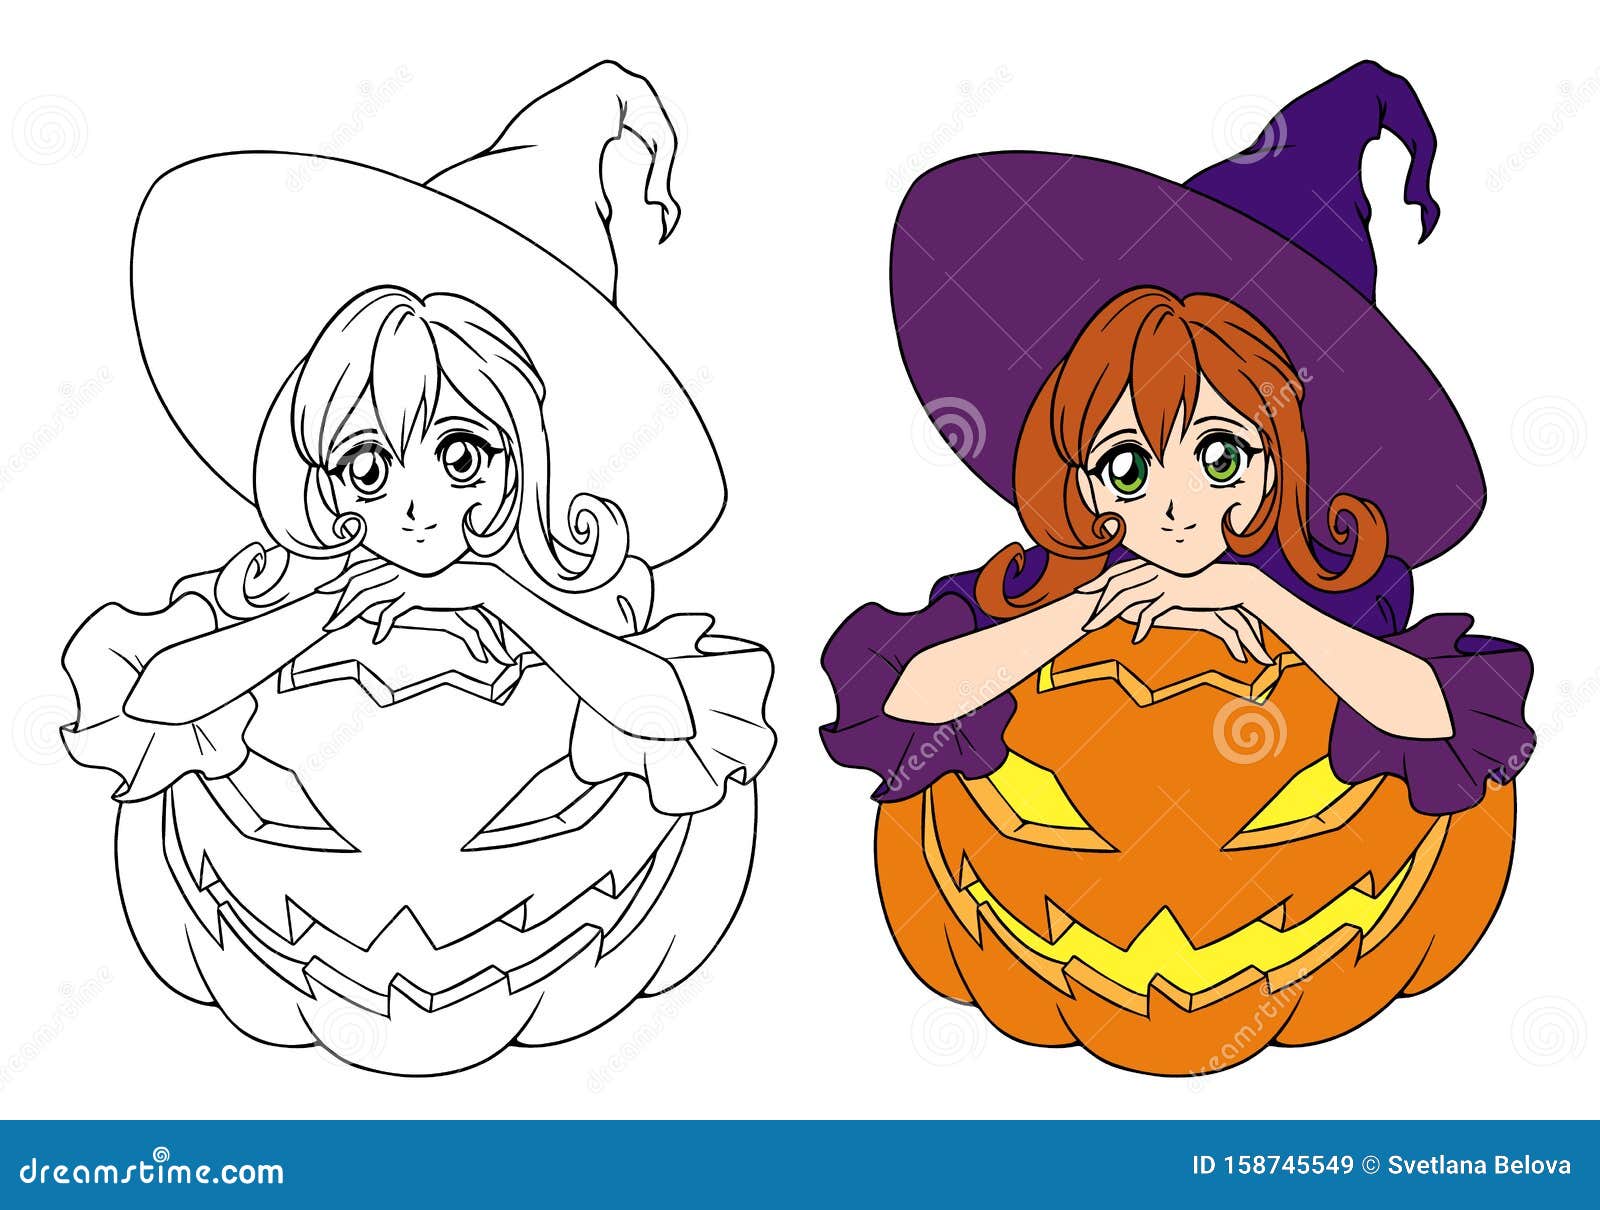 50 Spooky Halloween Coloring Pages for Kids (Free Printables)